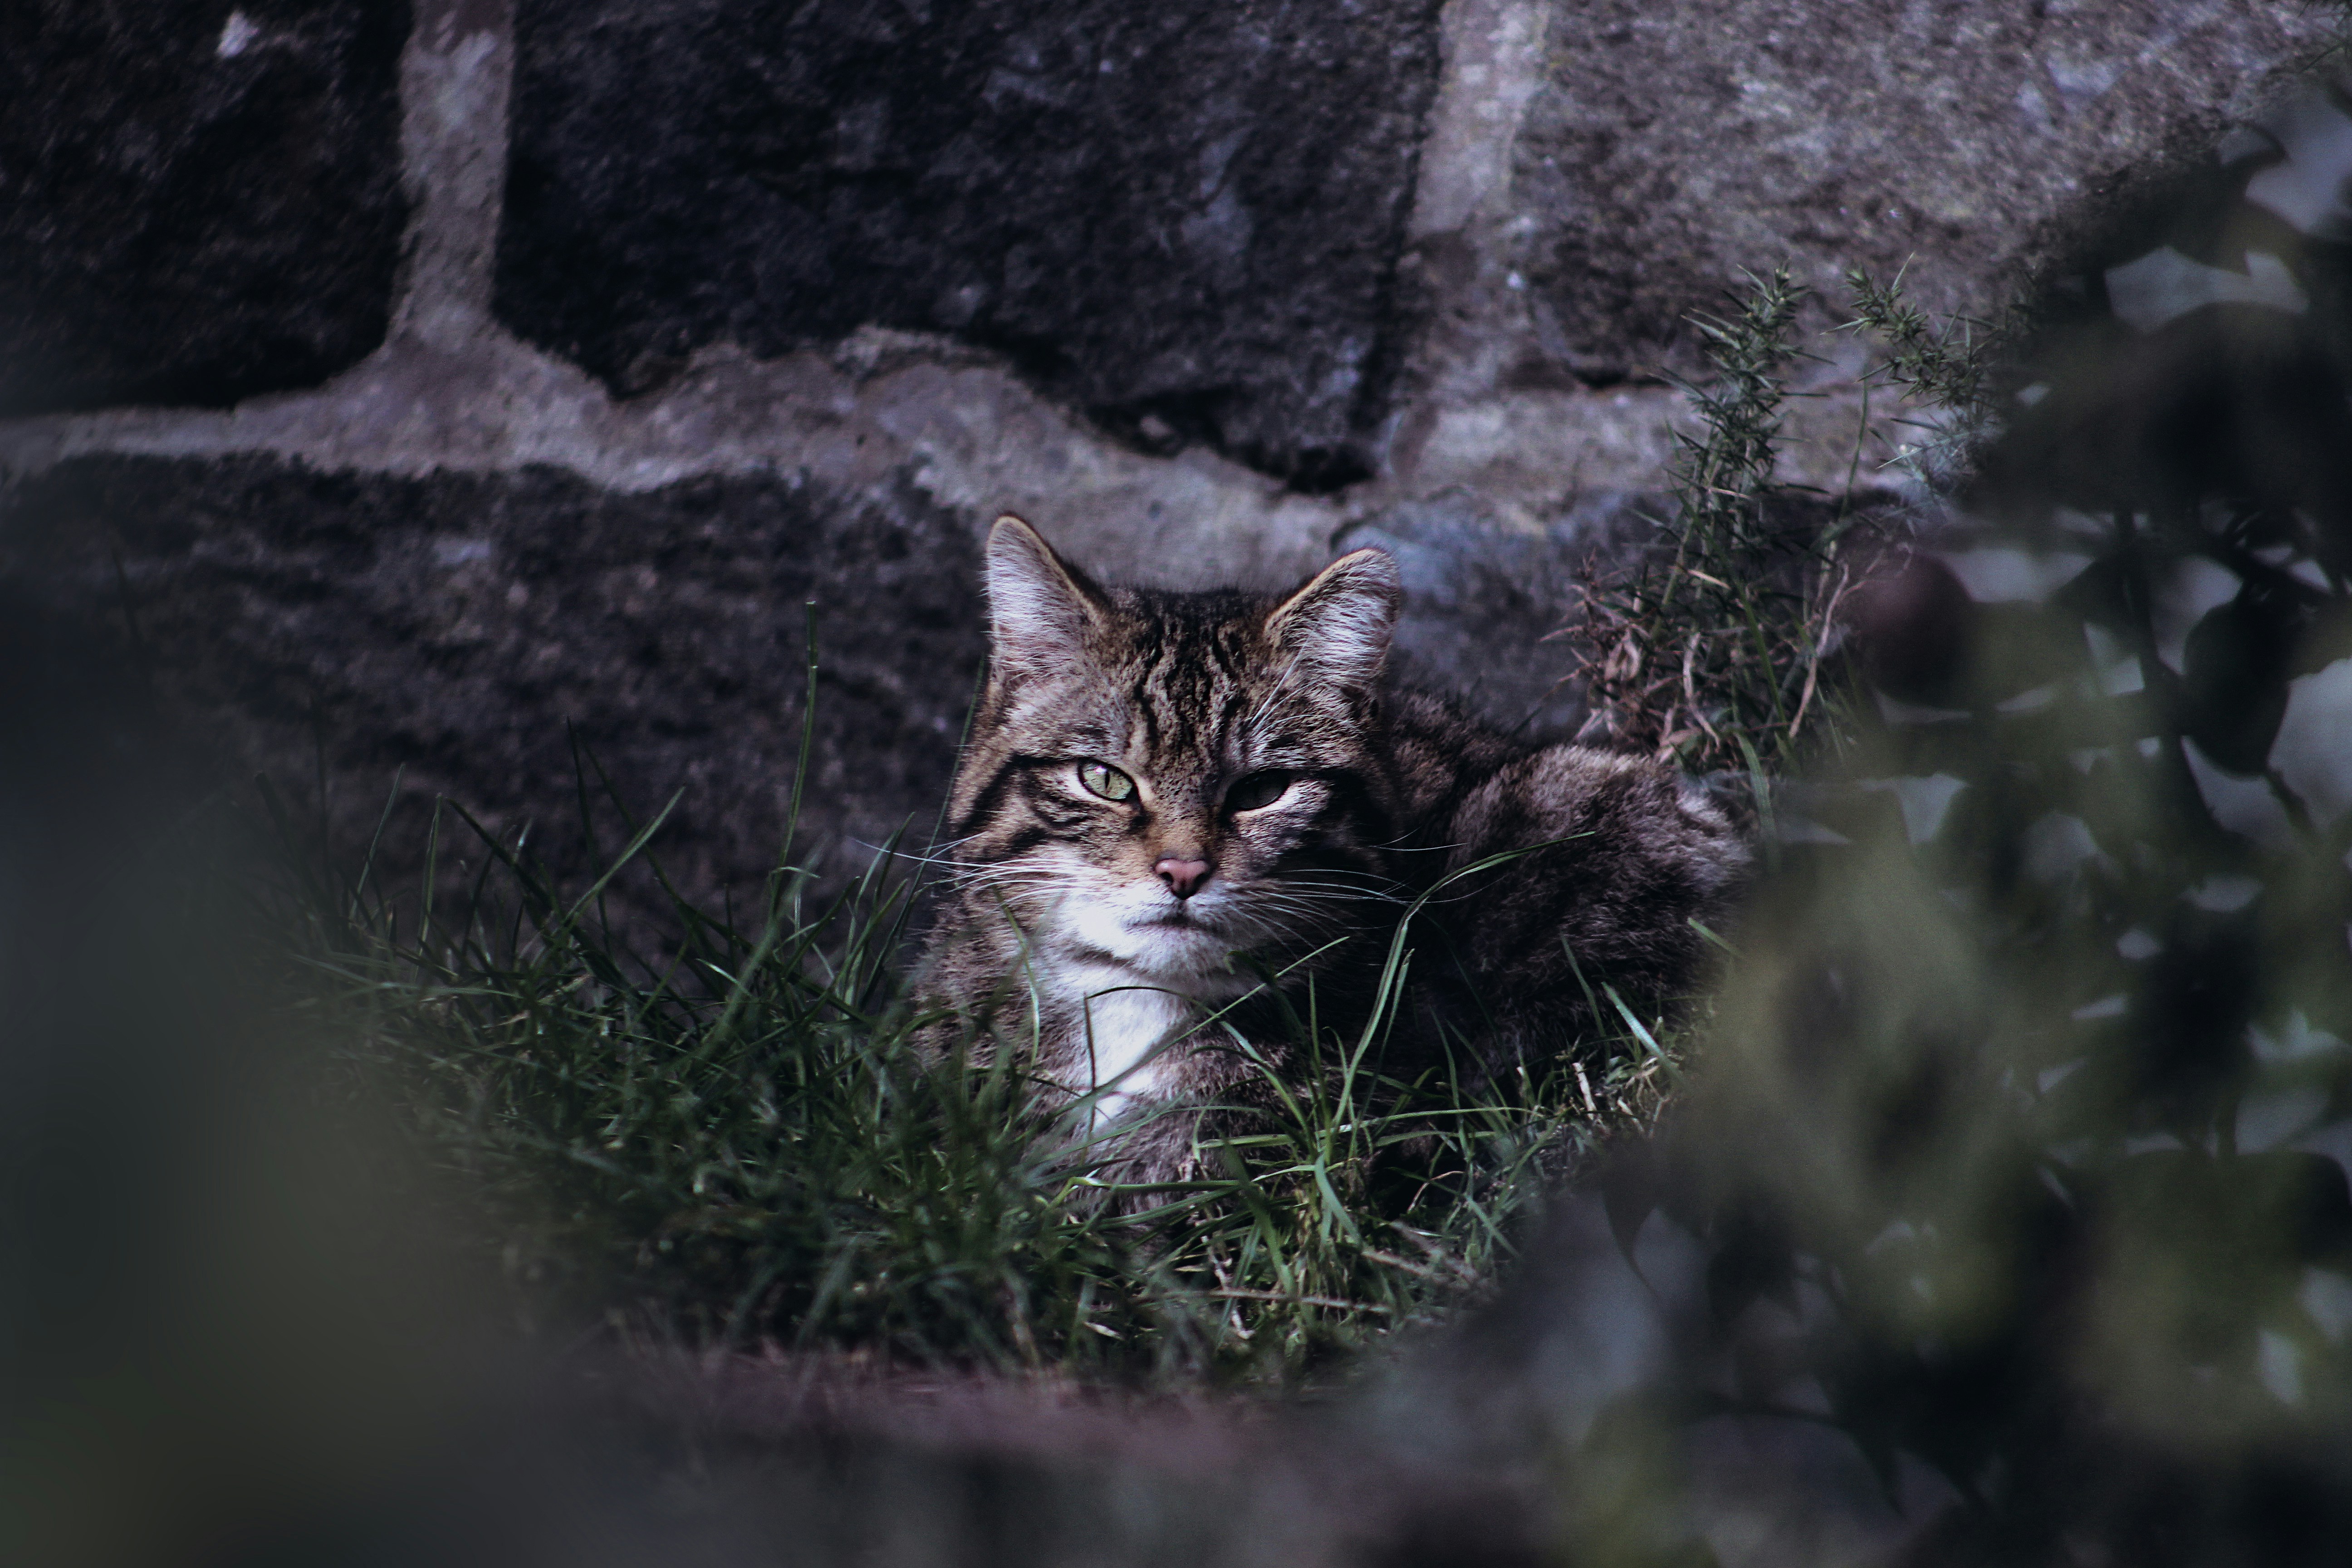 The Scottish wildcat (Felis silvestris grampia), or Highlands tiger, is a dark coloured subspecies of the European wildcat native to Scotland. Its range previously also included England and Wales, but it became extinct in these areas, as well as in southern Scotland, within the last 150 years. Extant numbers are estimated at between 100 and 300.